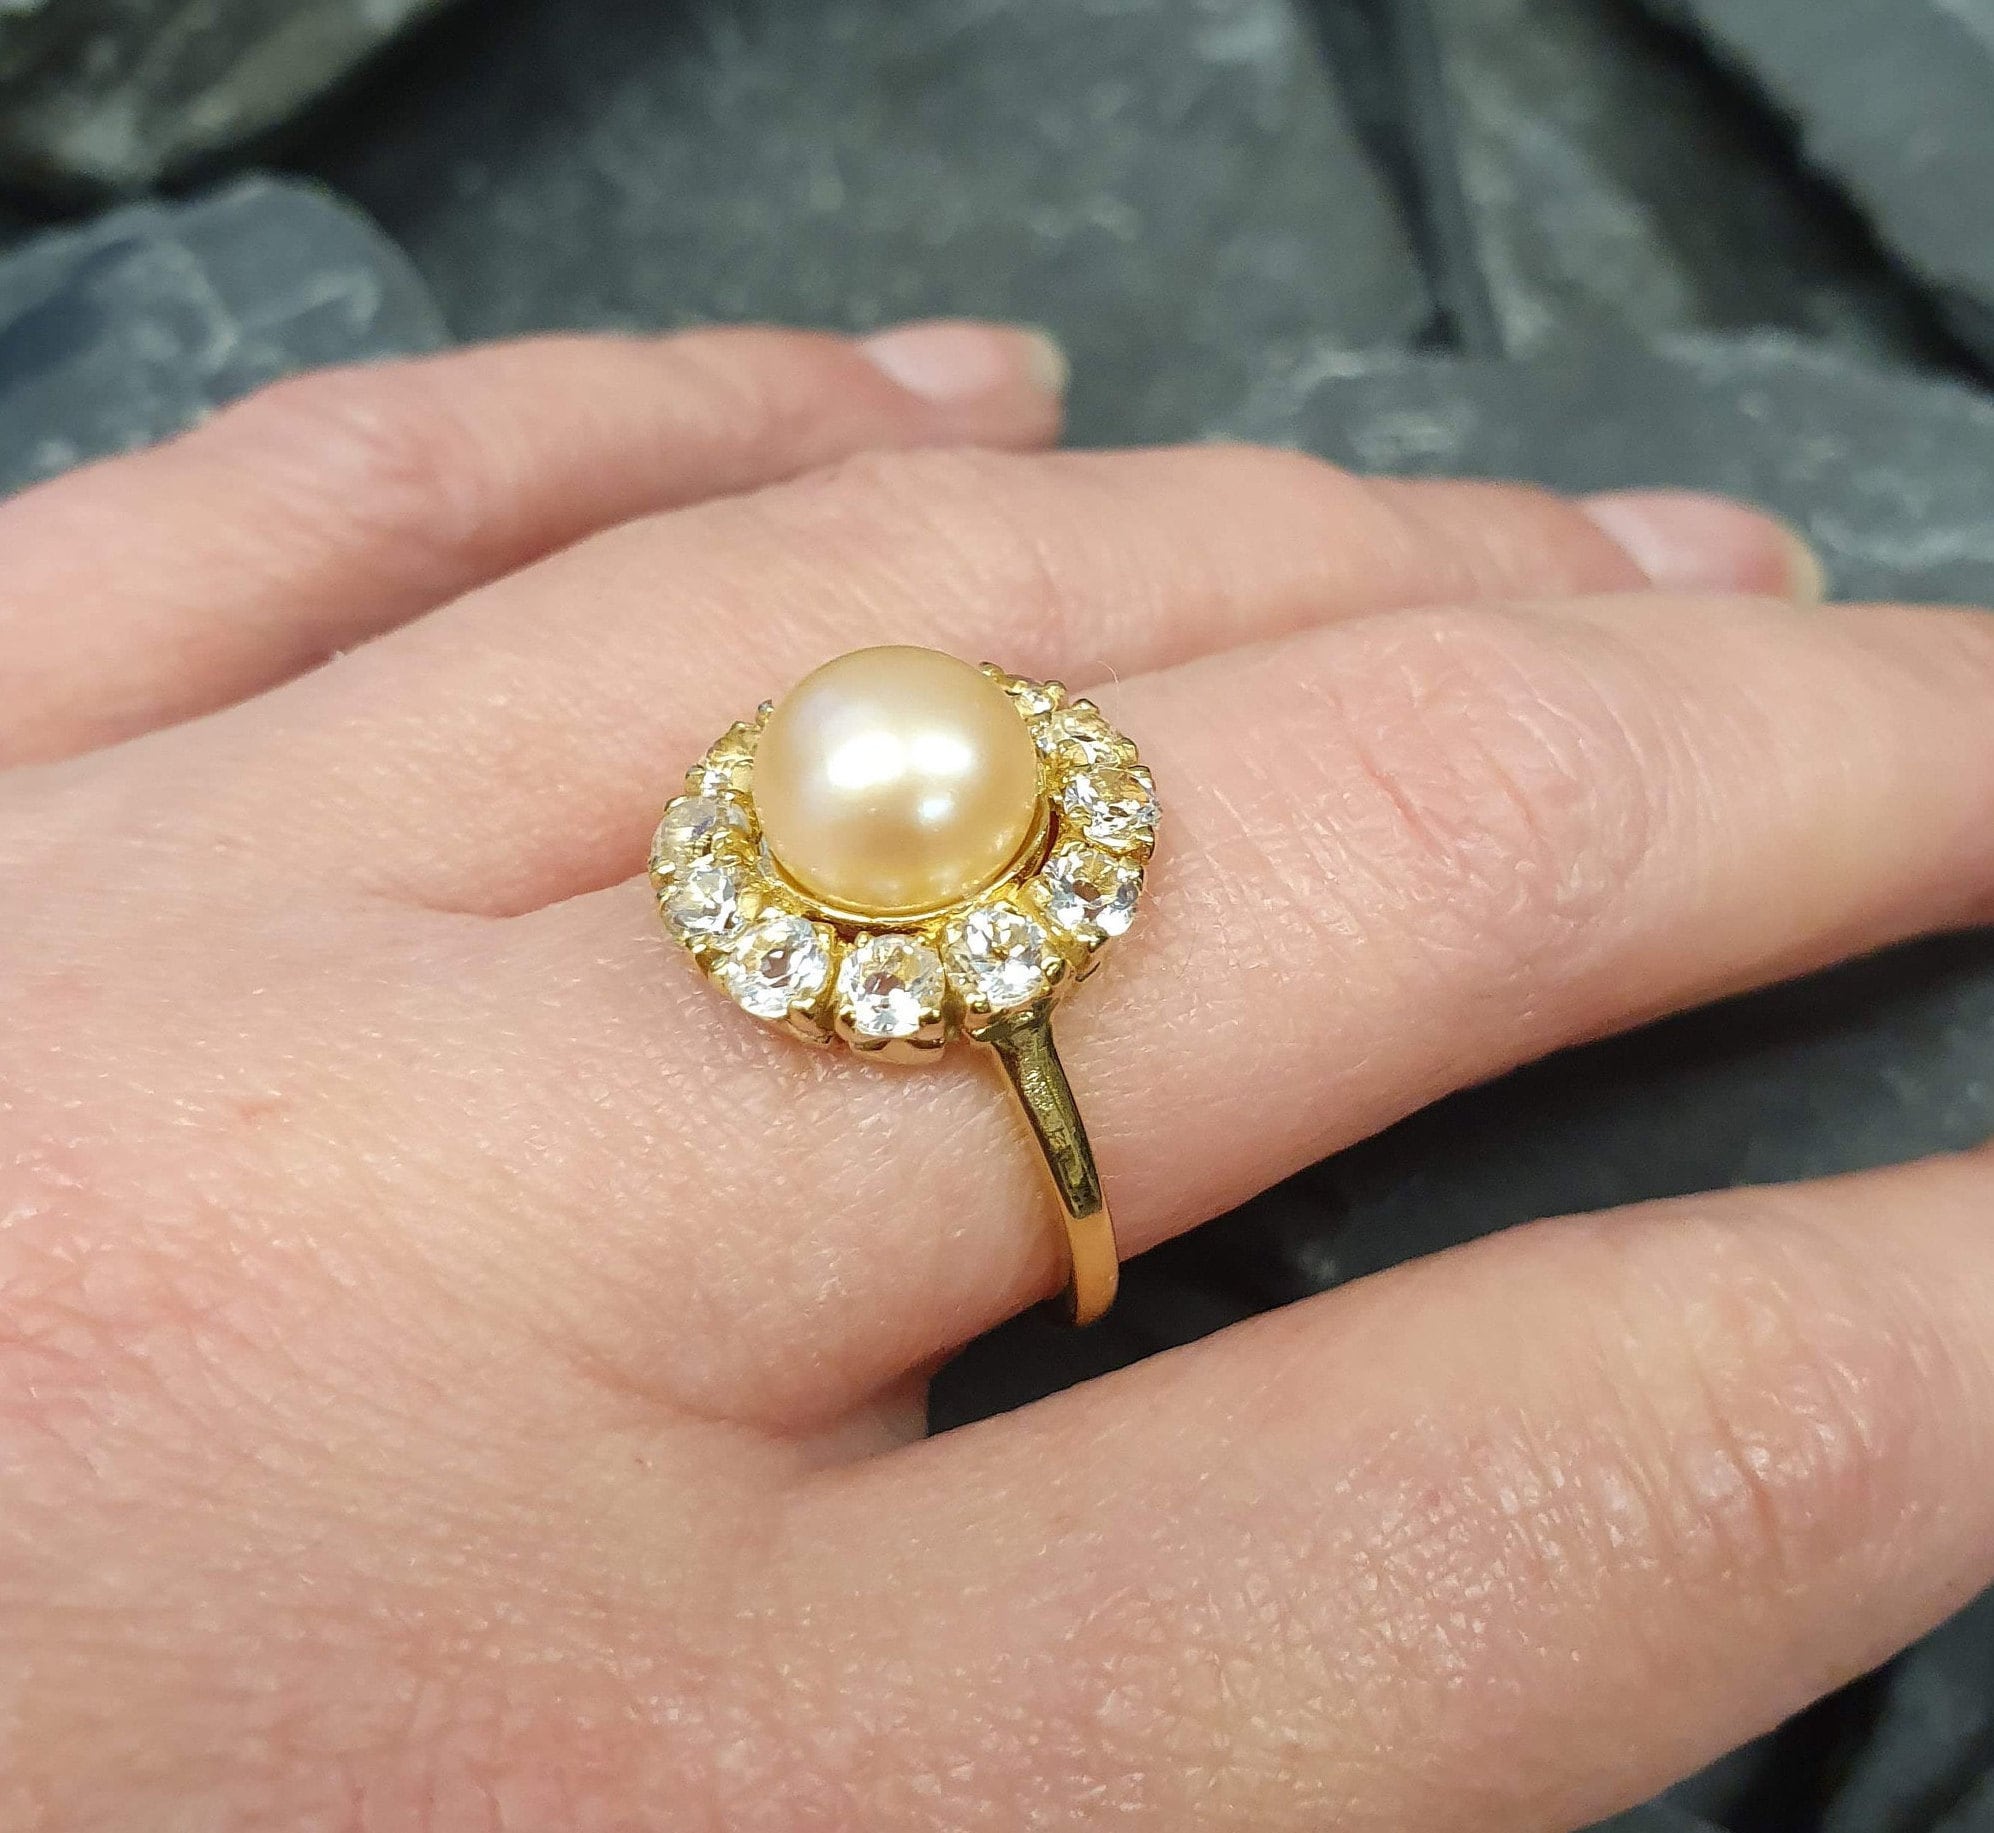 Beige Pearl Ring, Pearl Ring, Natural Beige Pearl, June Birthstone, Gold Victorian Ring, Gold Pearl Ring, Vintage Ring, Solid Silver Ring